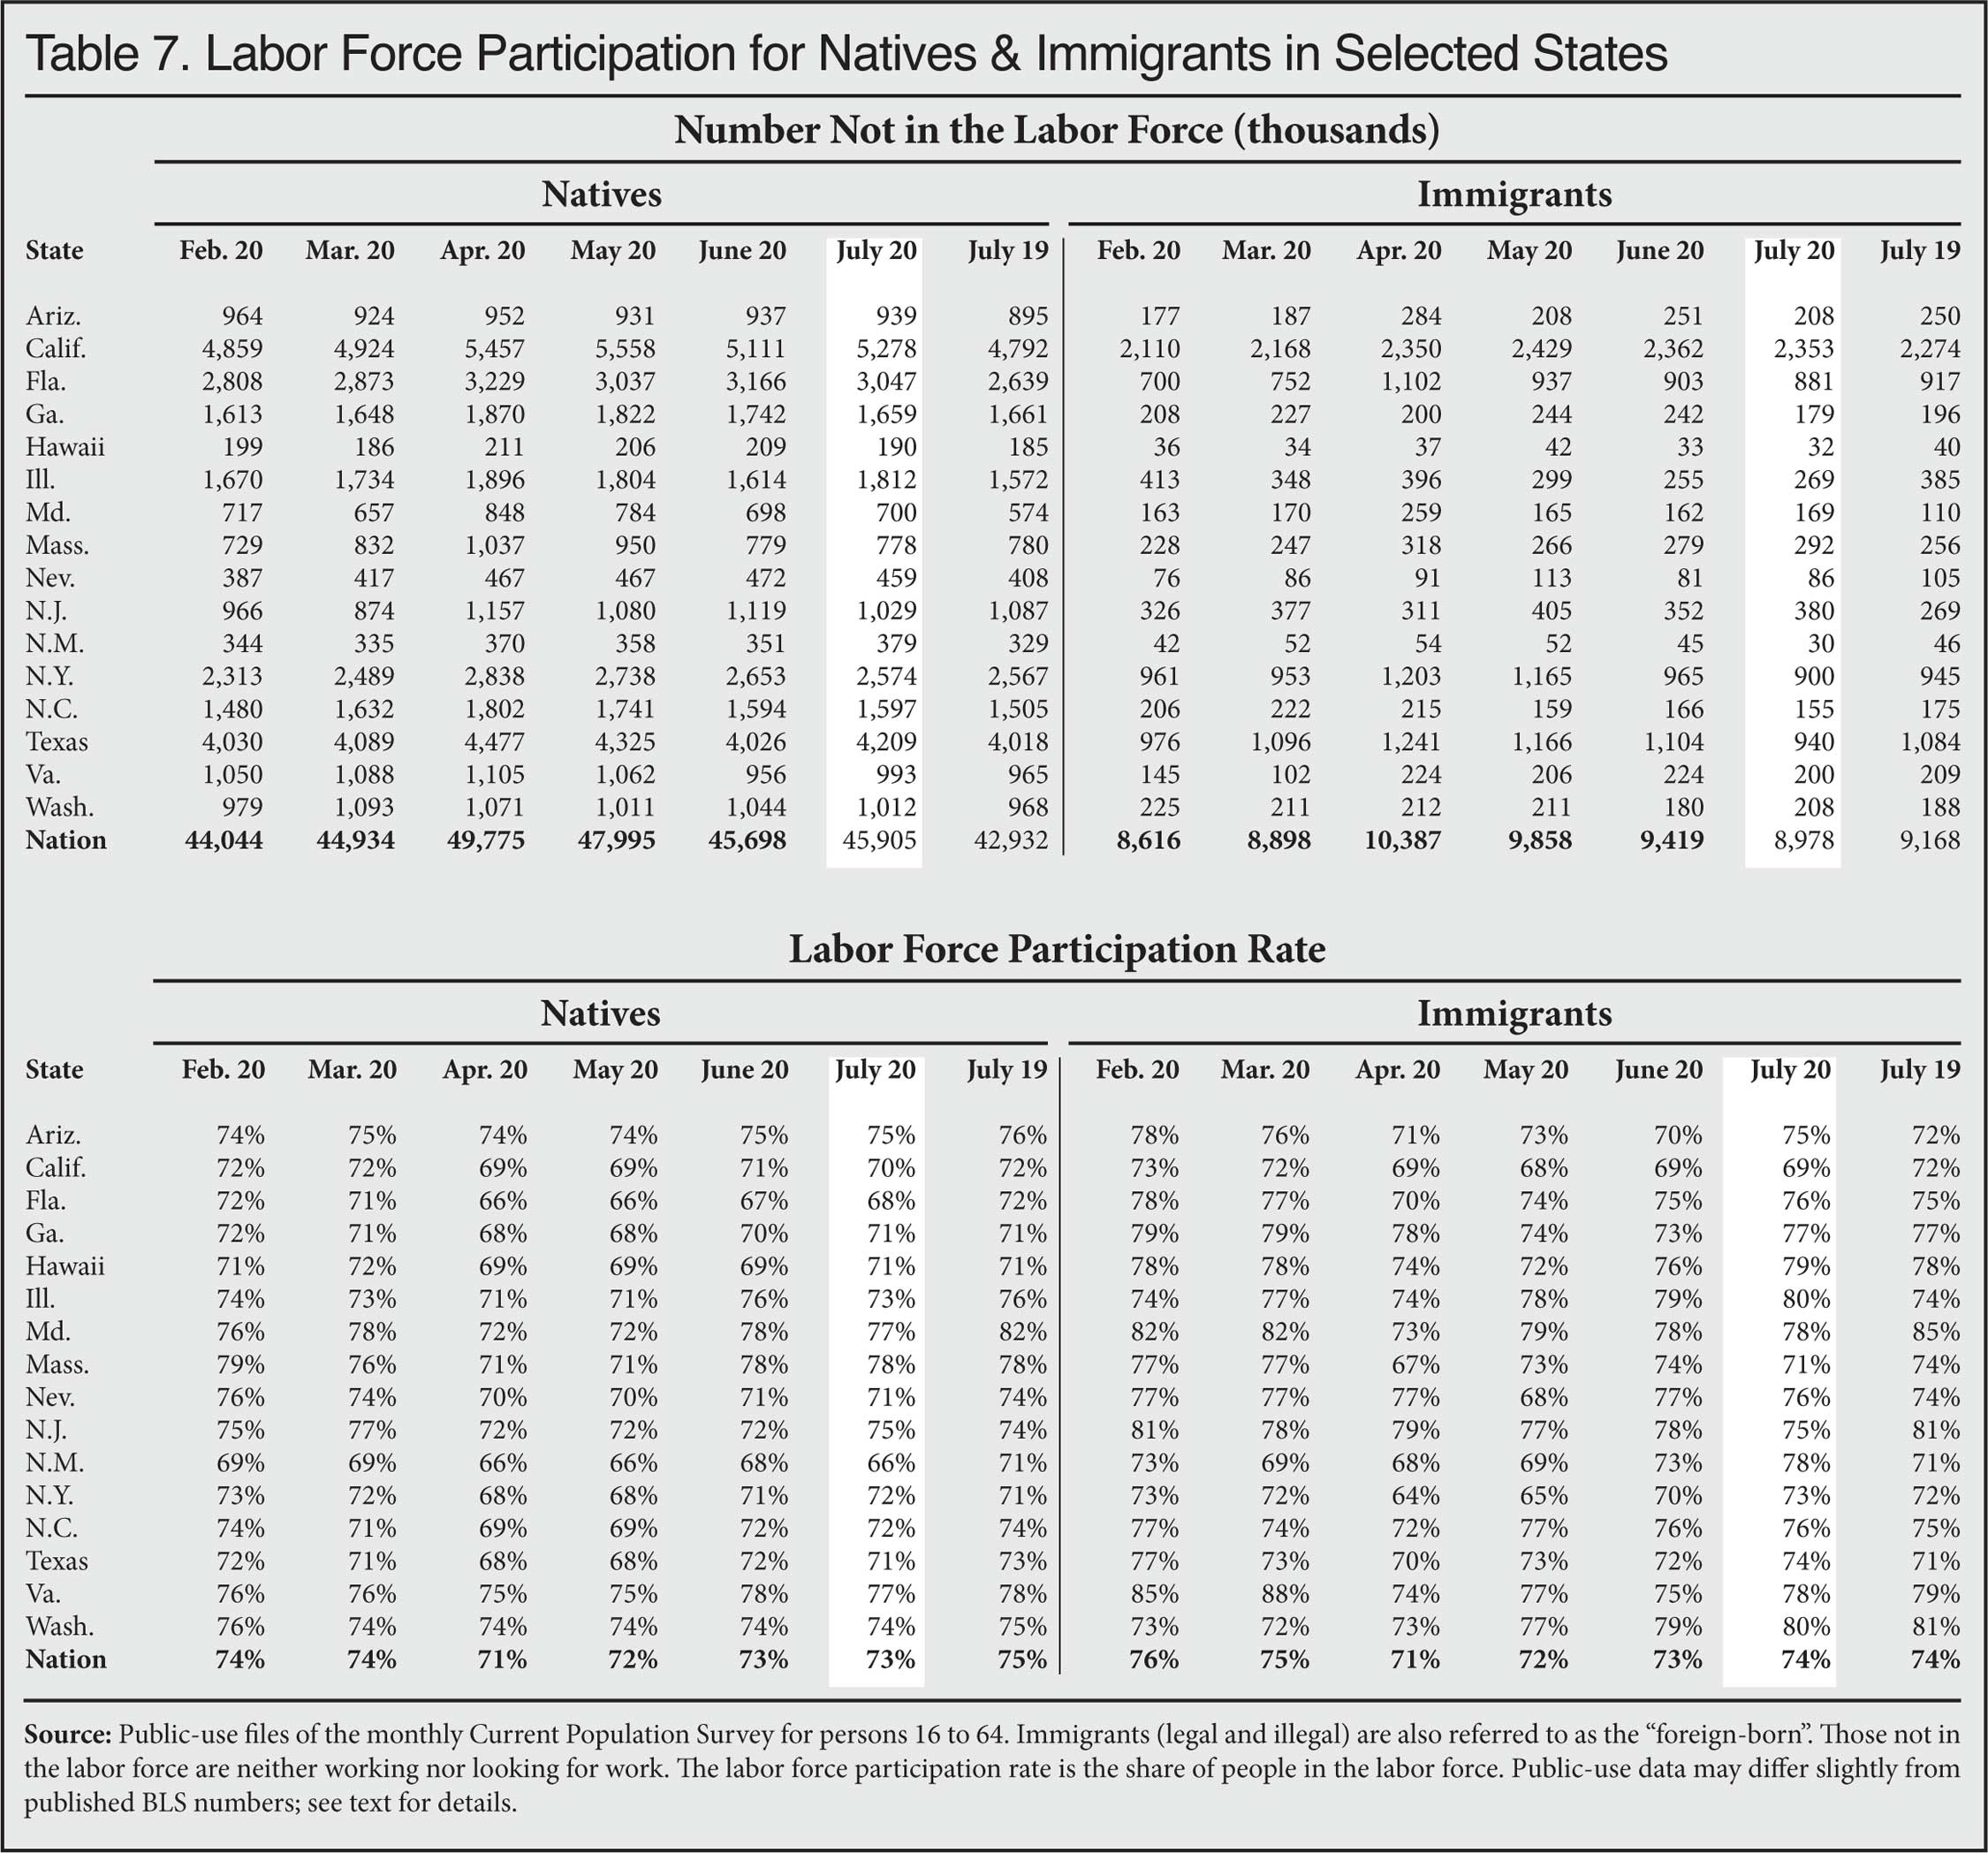 Graph: Labor Force Participation for Natives & Immigrants by Selected States